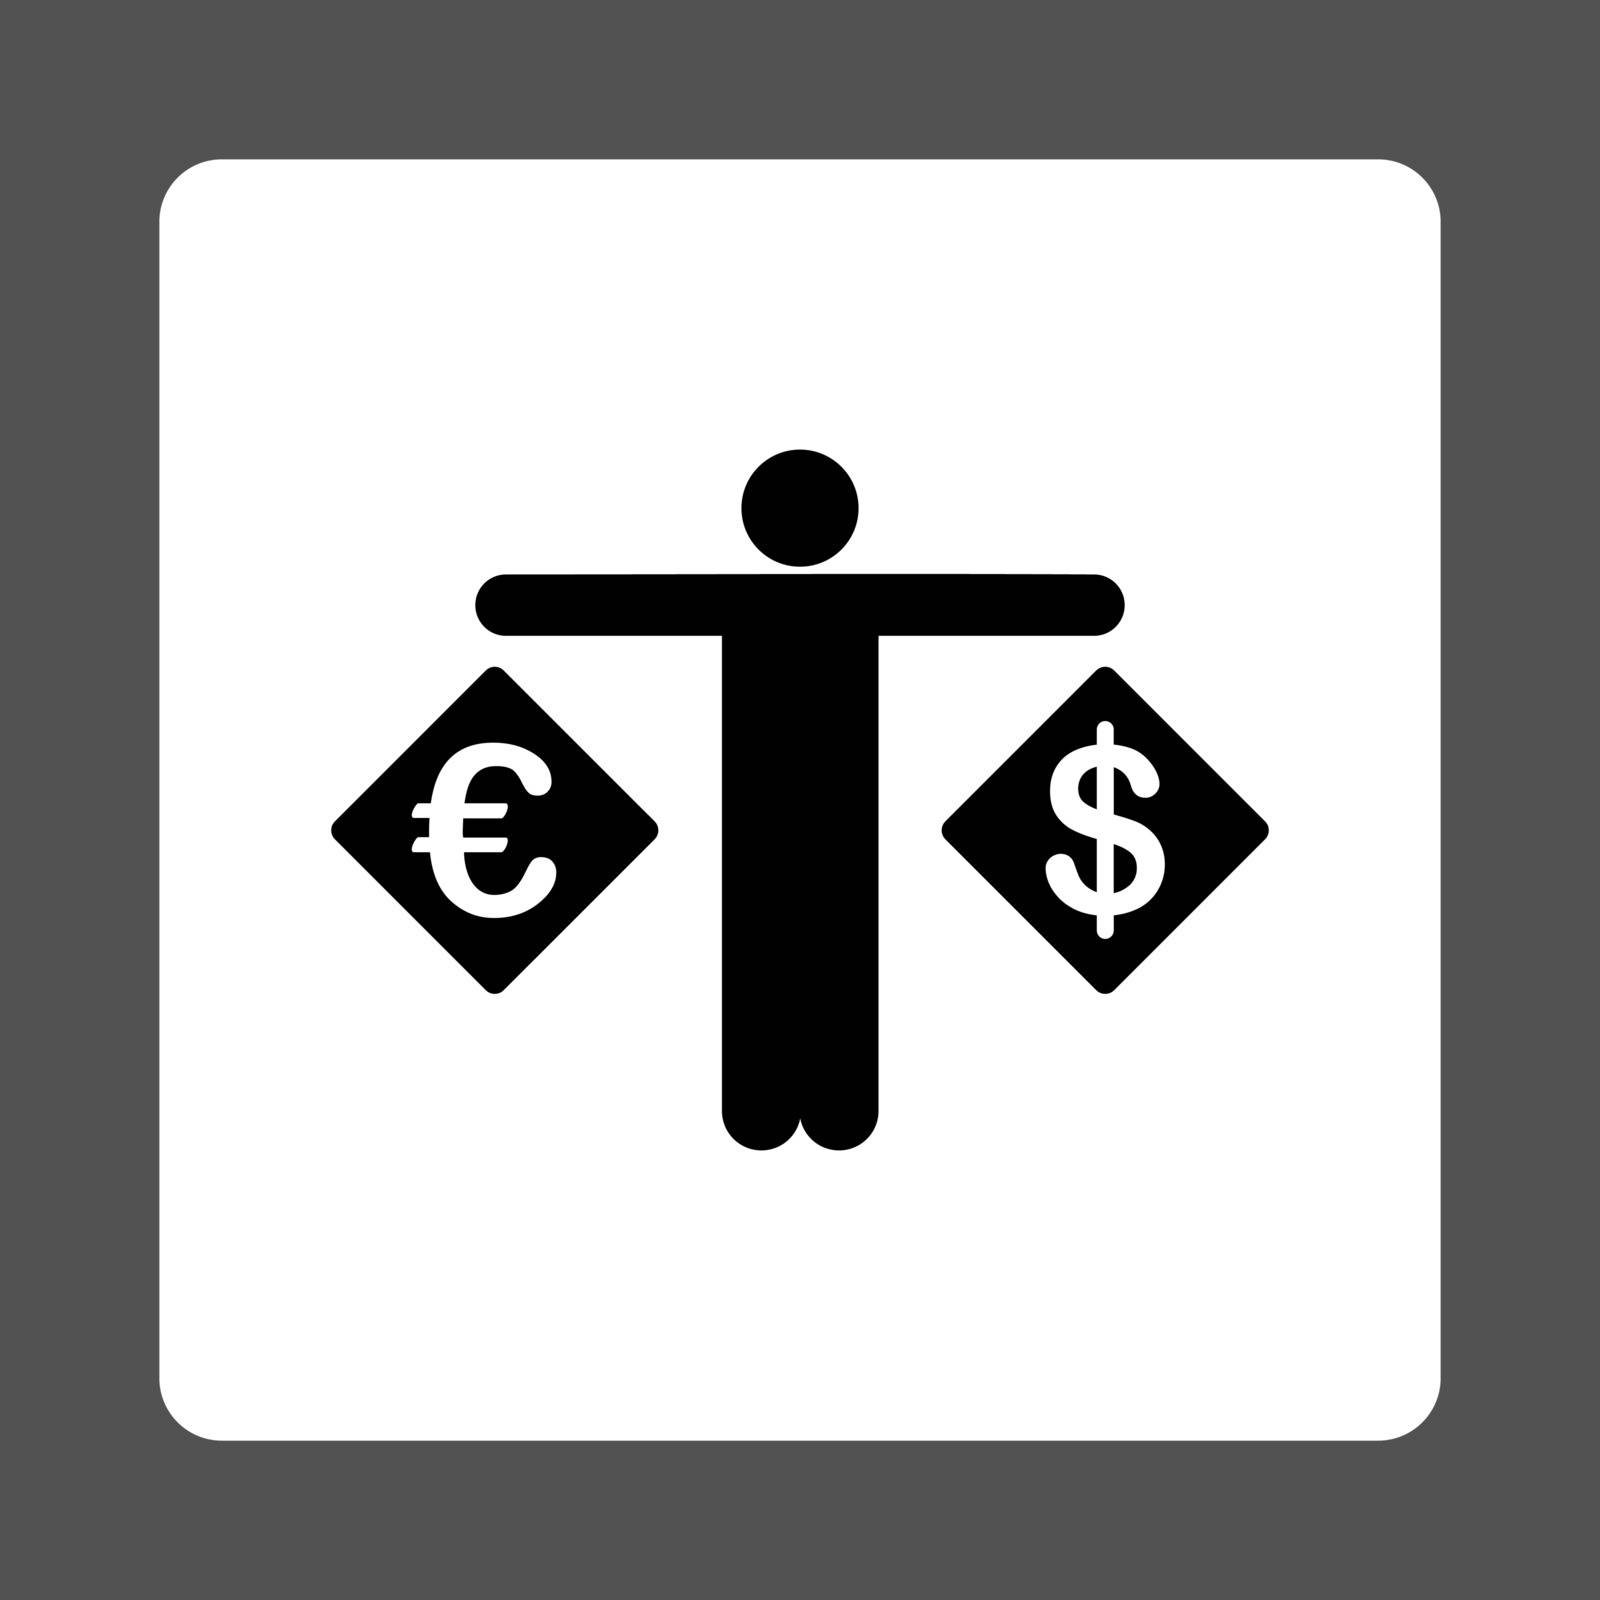 Currency compare icon. Vector style is black and white colors, flat rounded square button on a gray background.